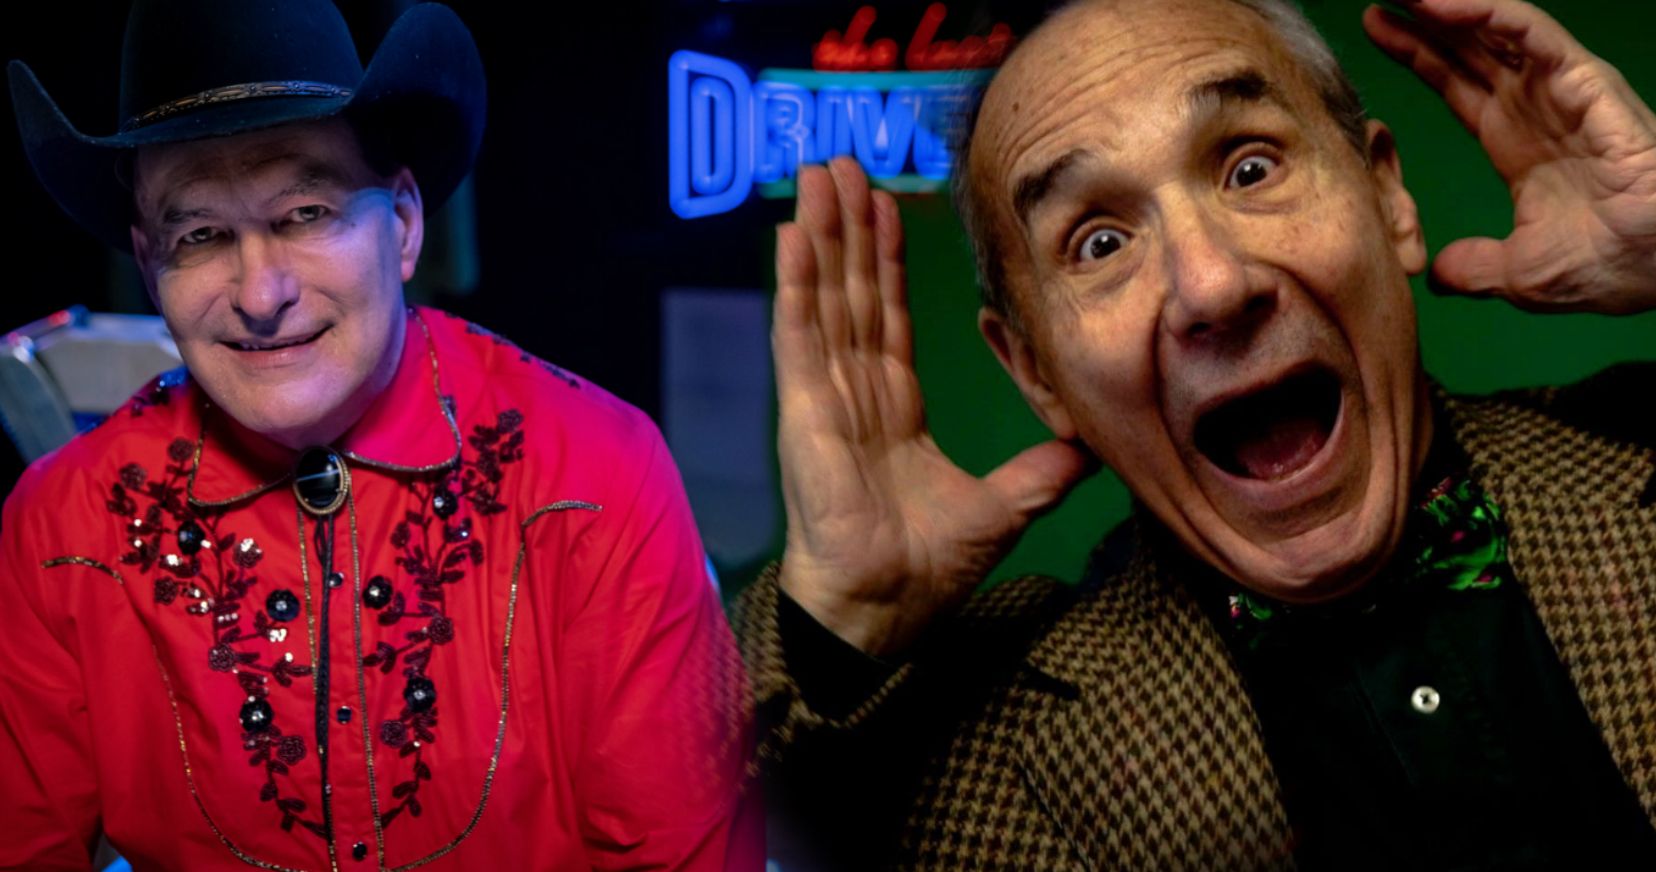 Troma Legend Lloyd Kaufman Is Visiting The Last Drive-In with Joe Bob Briggs This Friday